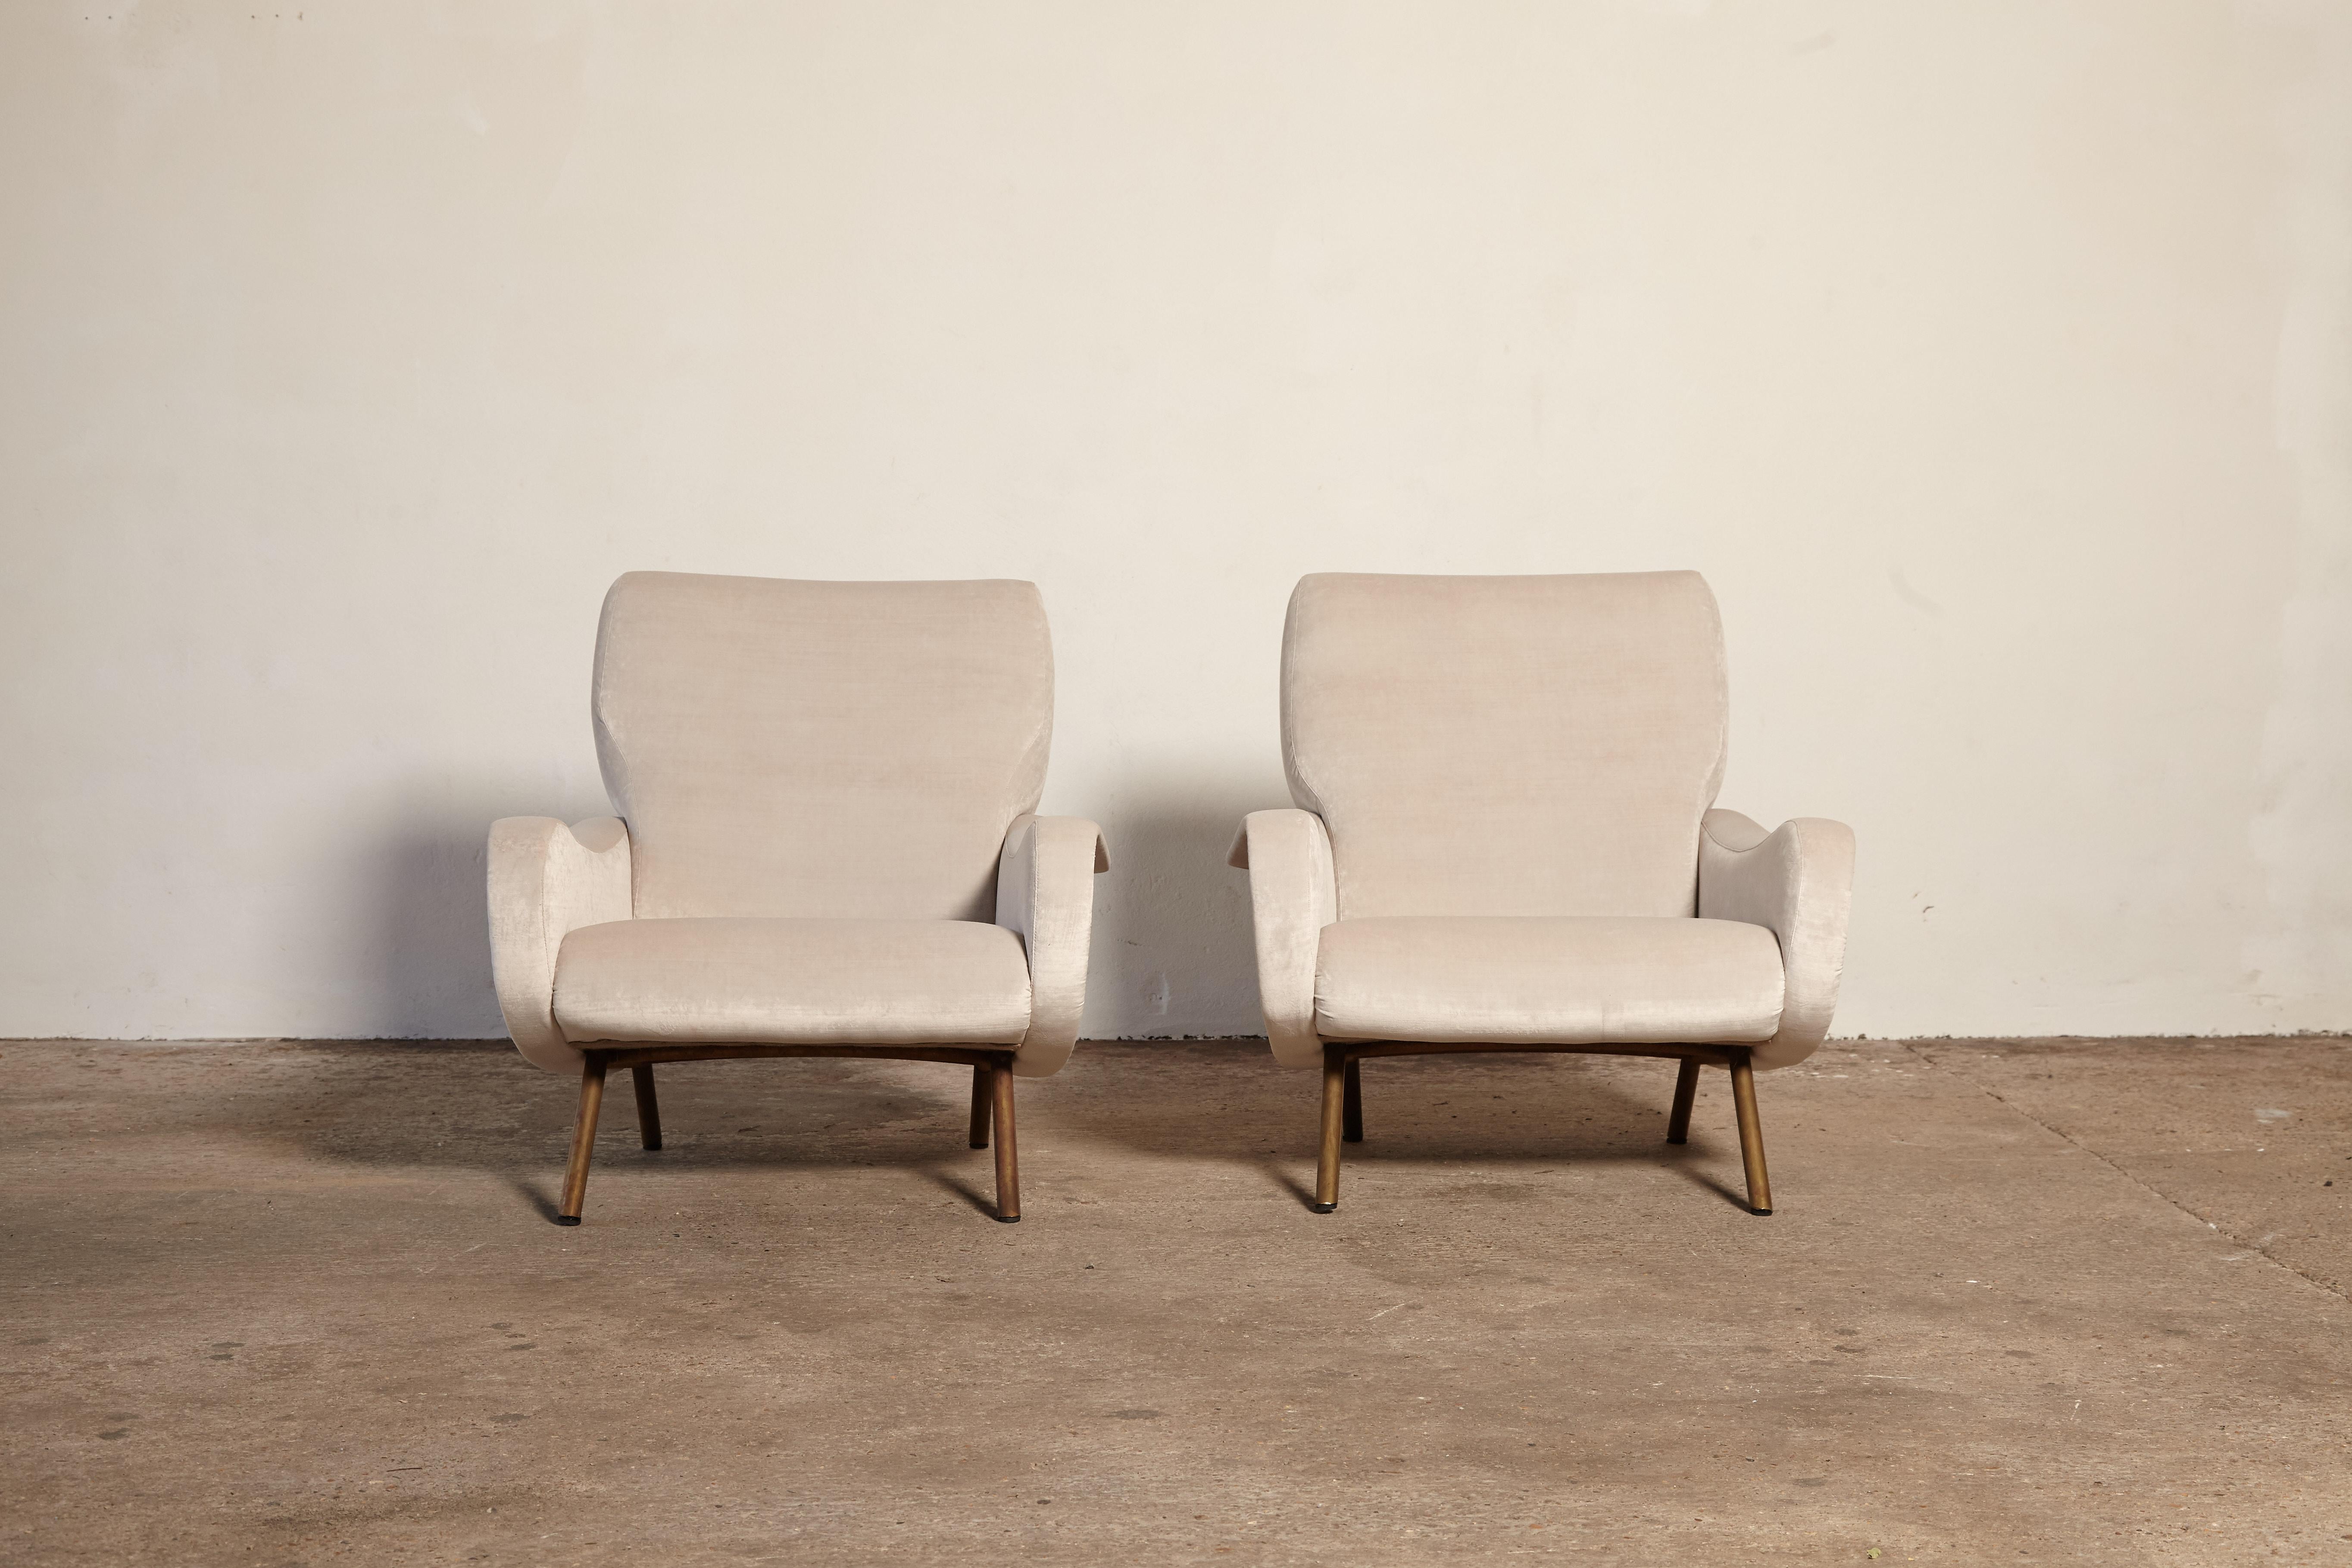 Pair of Lady Chairs Designed by Marco Zanuso, Italy 1